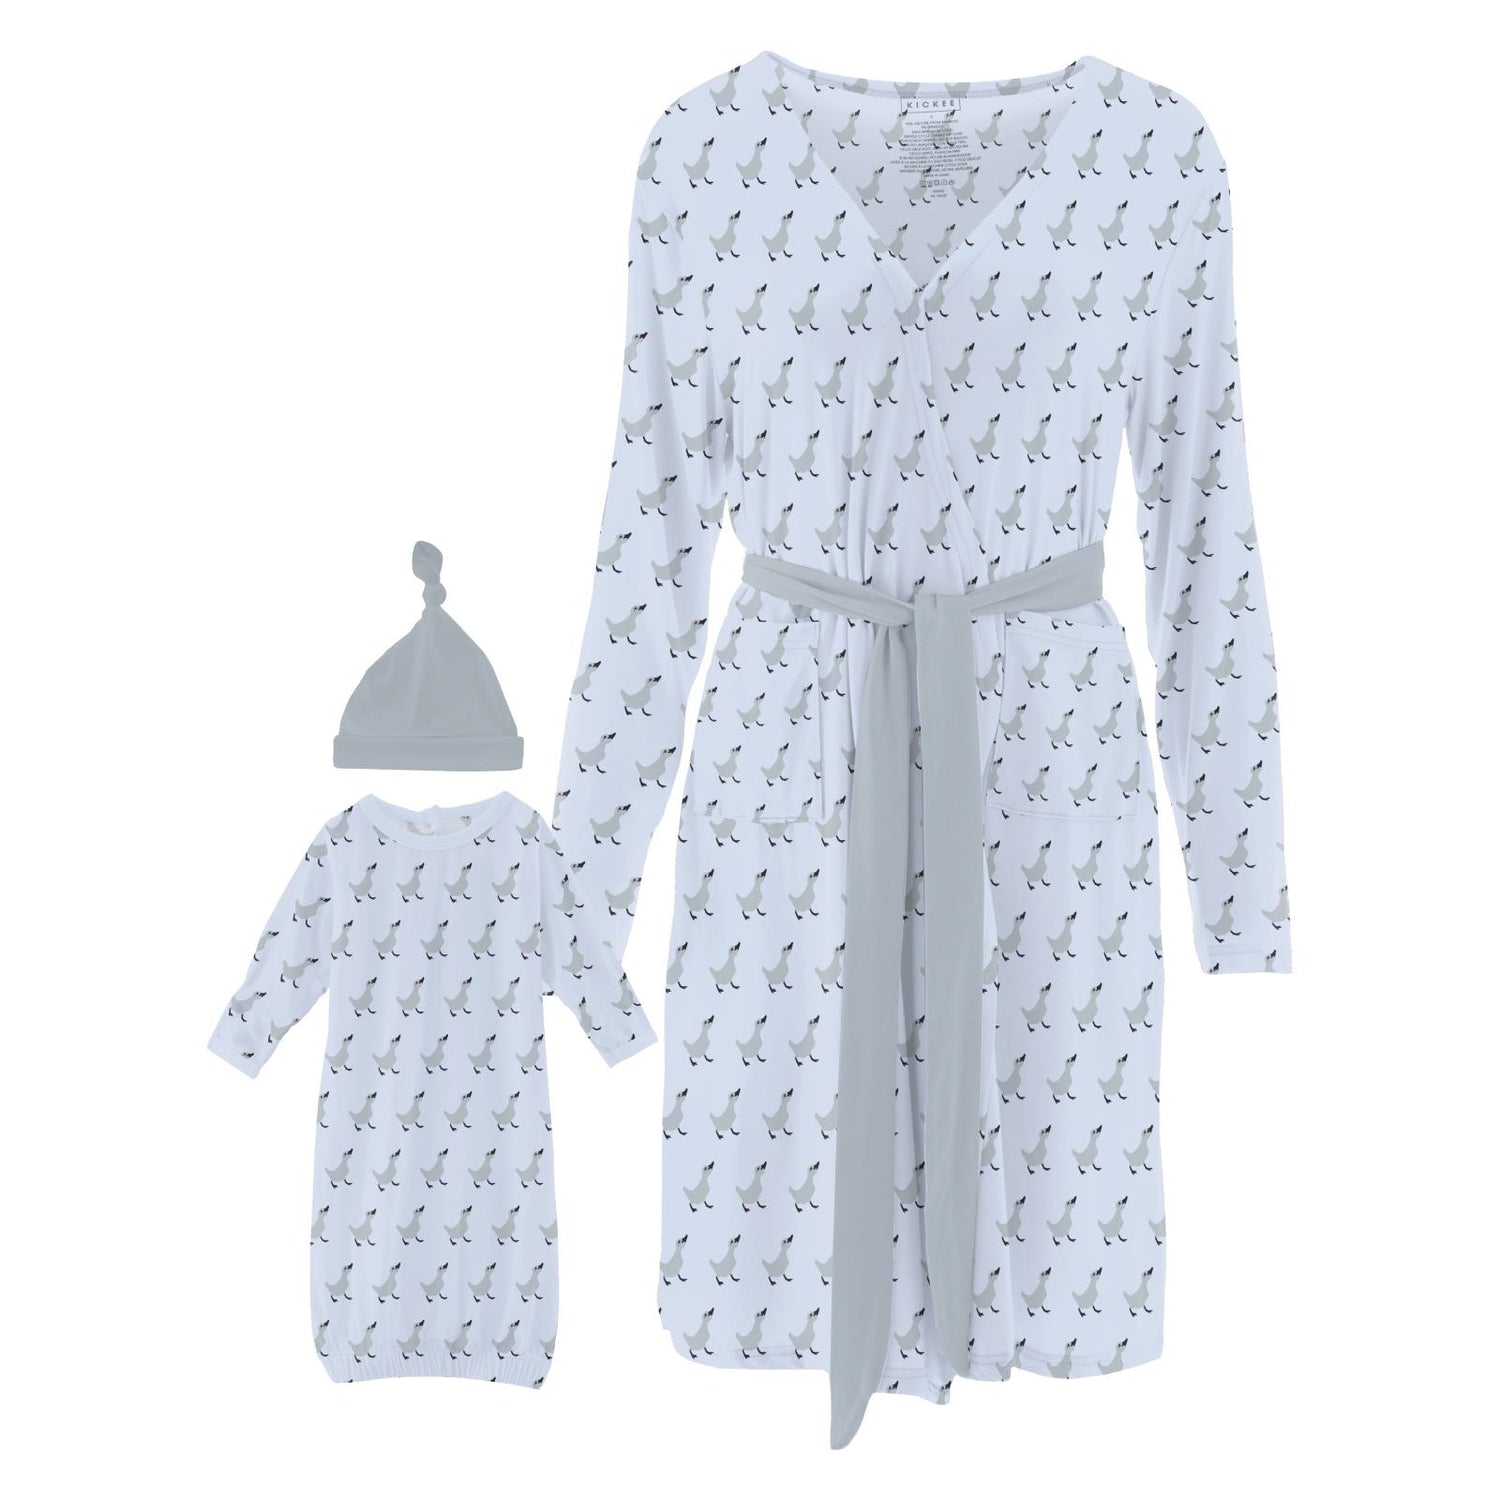 Women's Print Mid Length Lounge Robe & Layette Gown Set in Dew Ugly Duckling